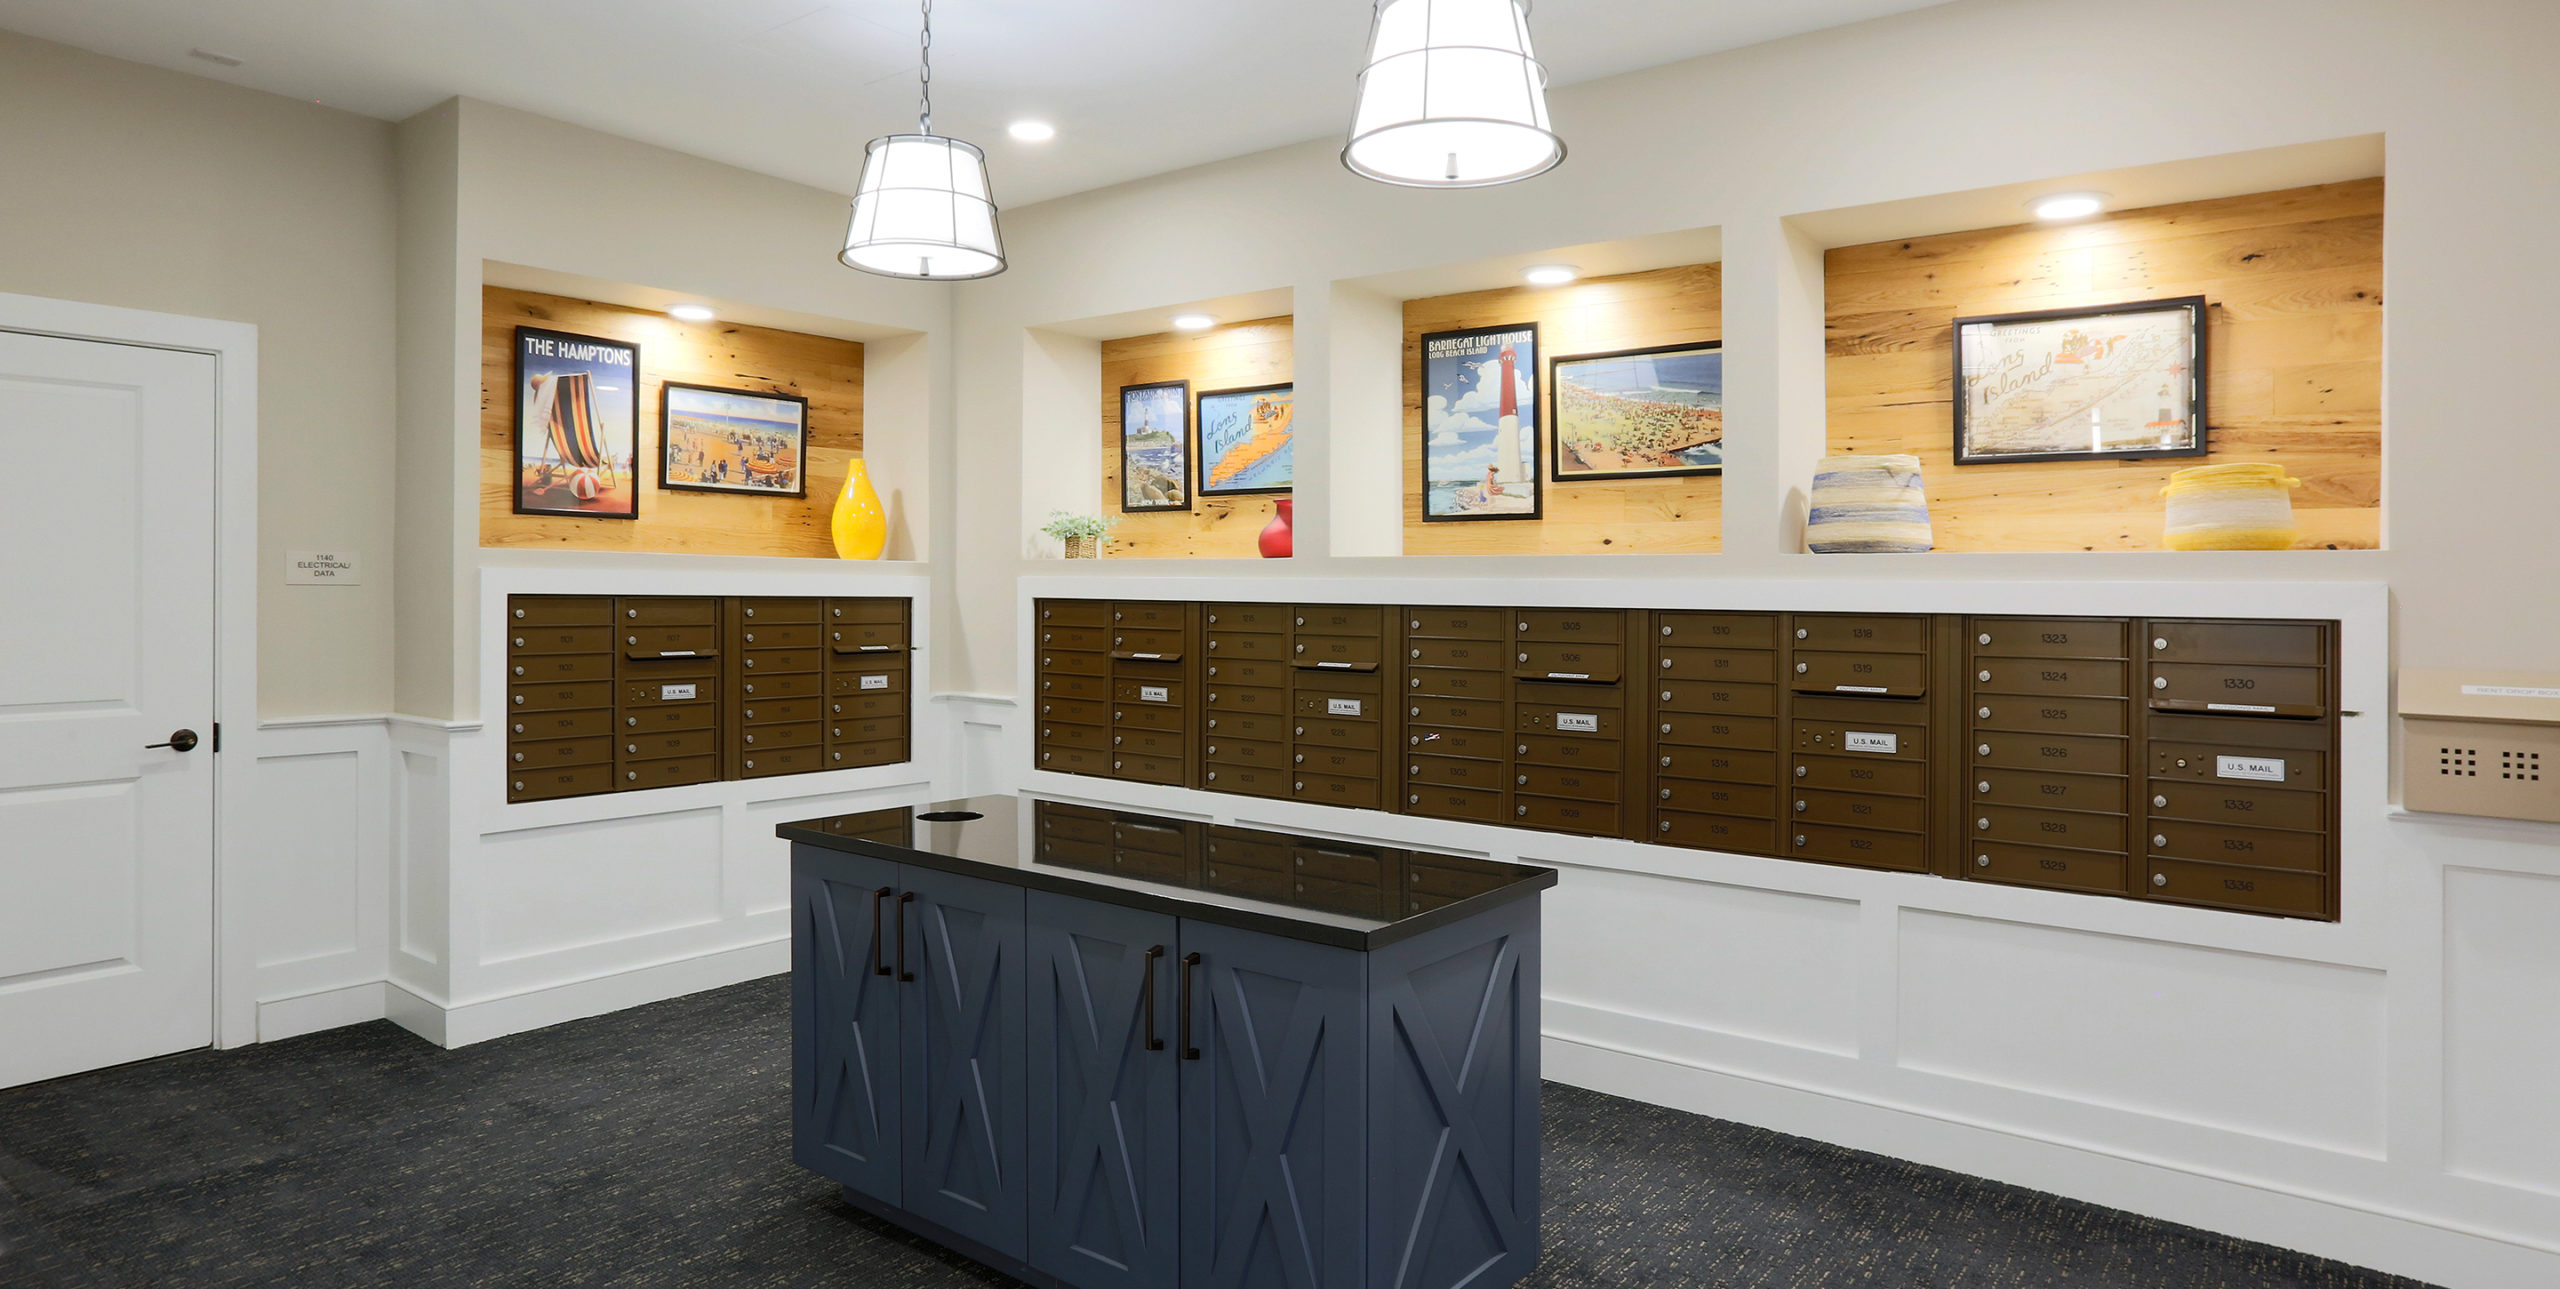 Mailroom at Brightview Senior Living in Sayville, NY